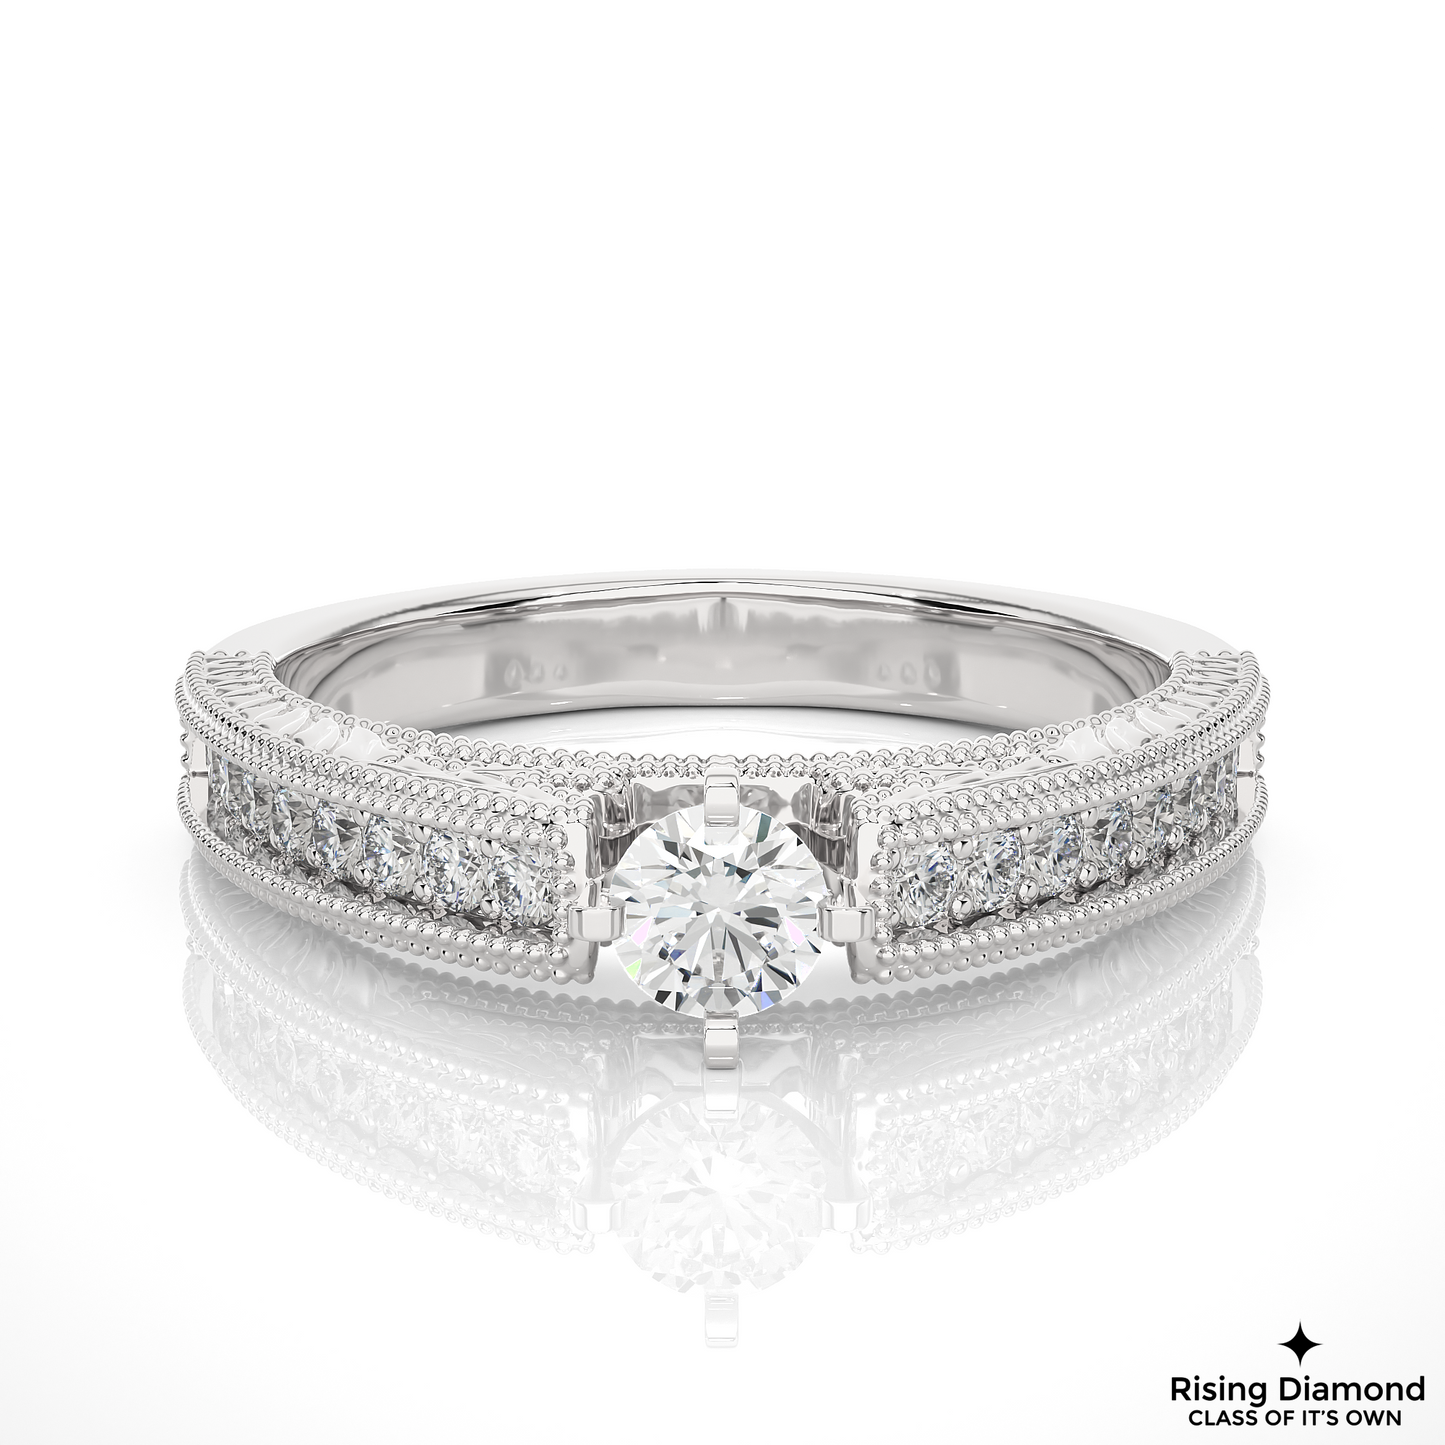 1.01 CT Round Cut Lab Grown Diamond Engagement Ring With Chanel Setting in mil-Grain Shank